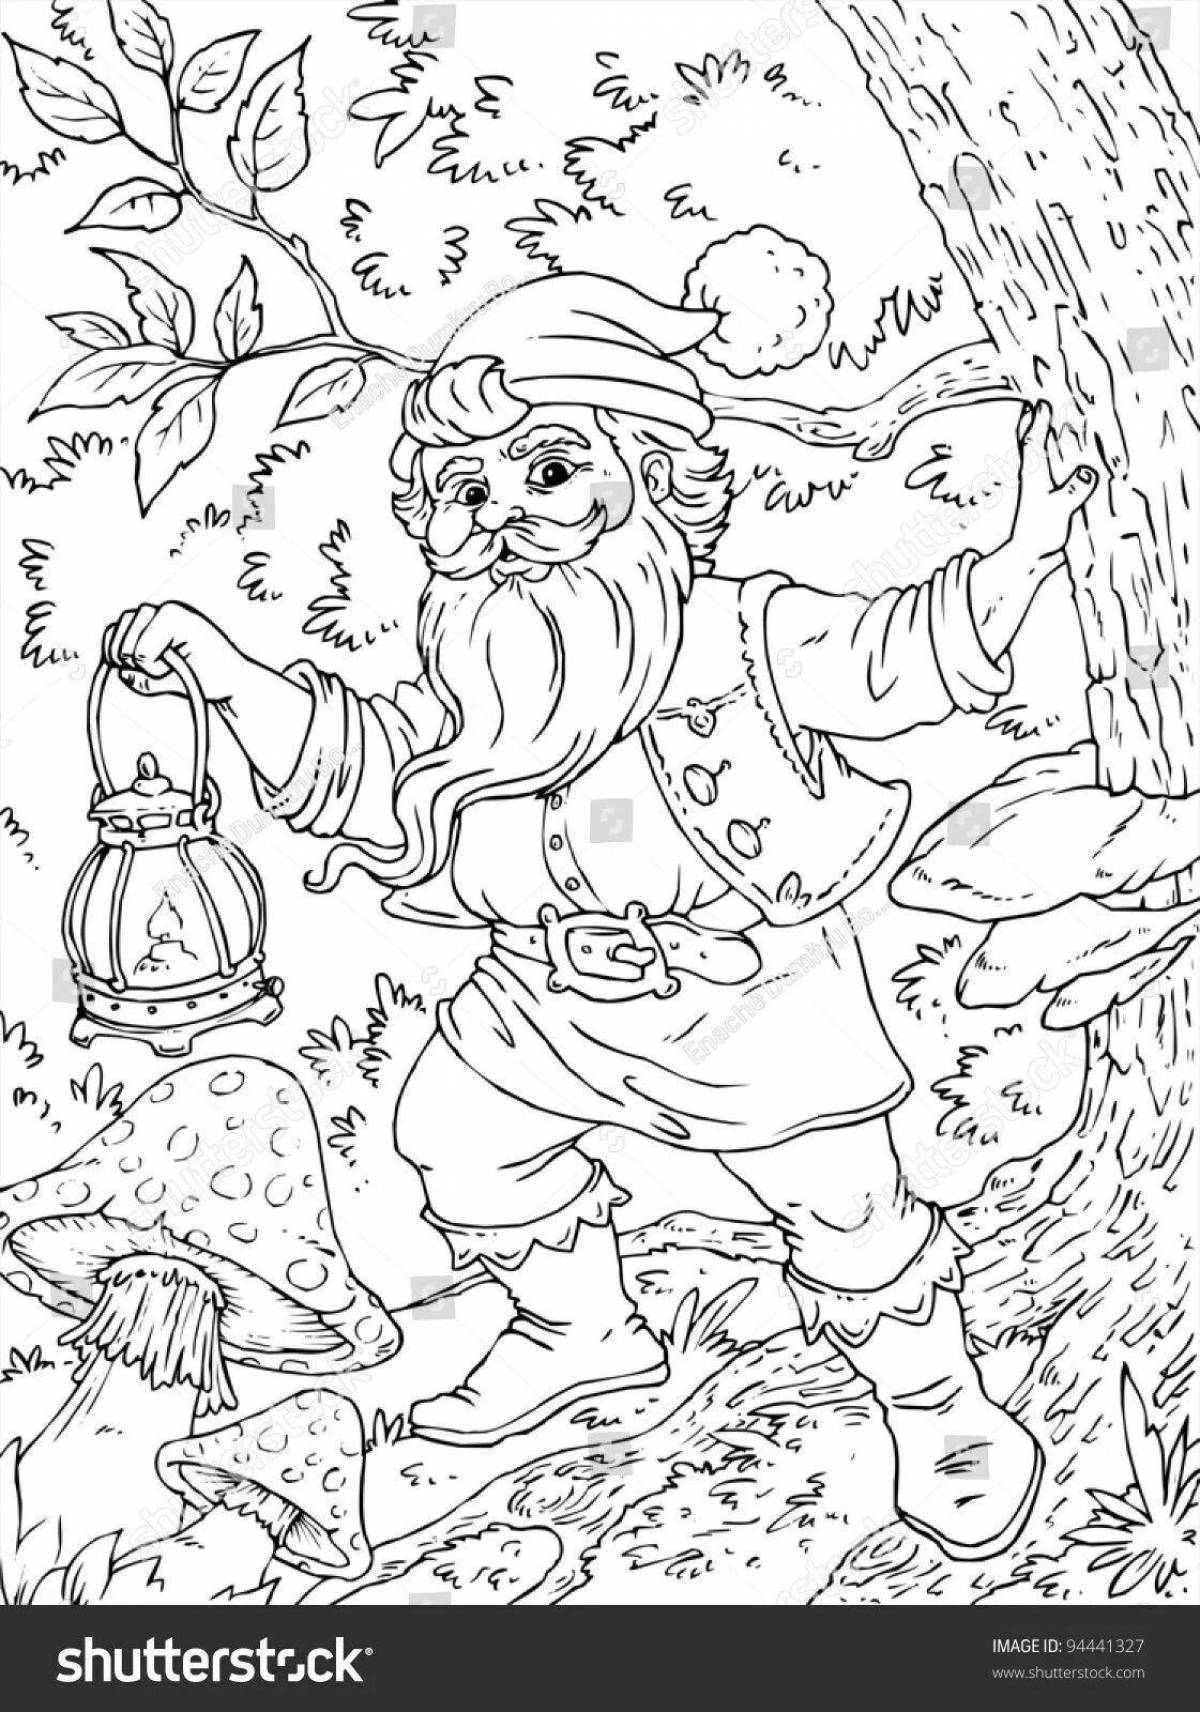 Colorful animated goblin coloring page for kids